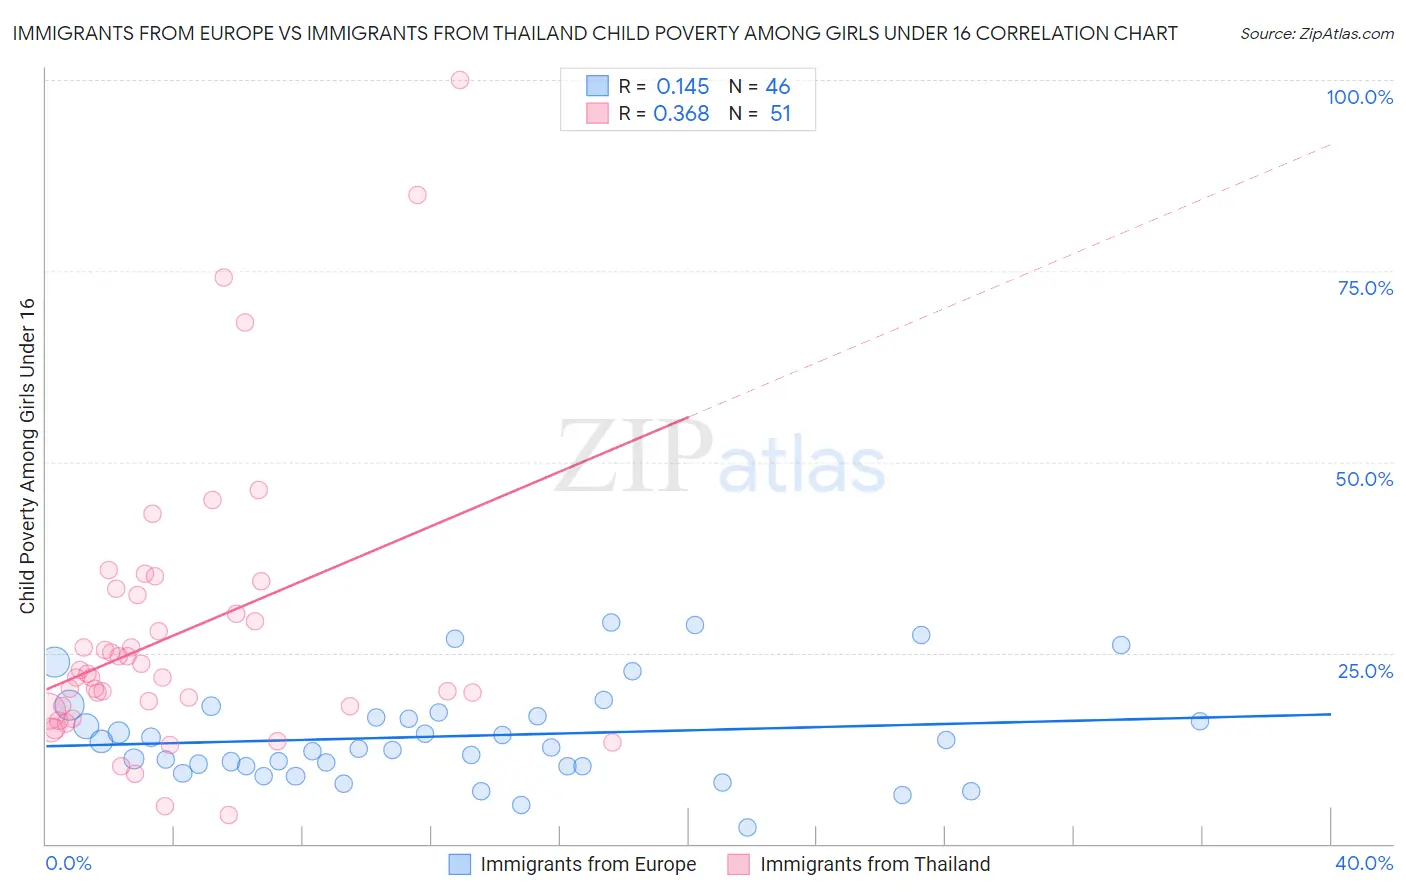 Immigrants from Europe vs Immigrants from Thailand Child Poverty Among Girls Under 16